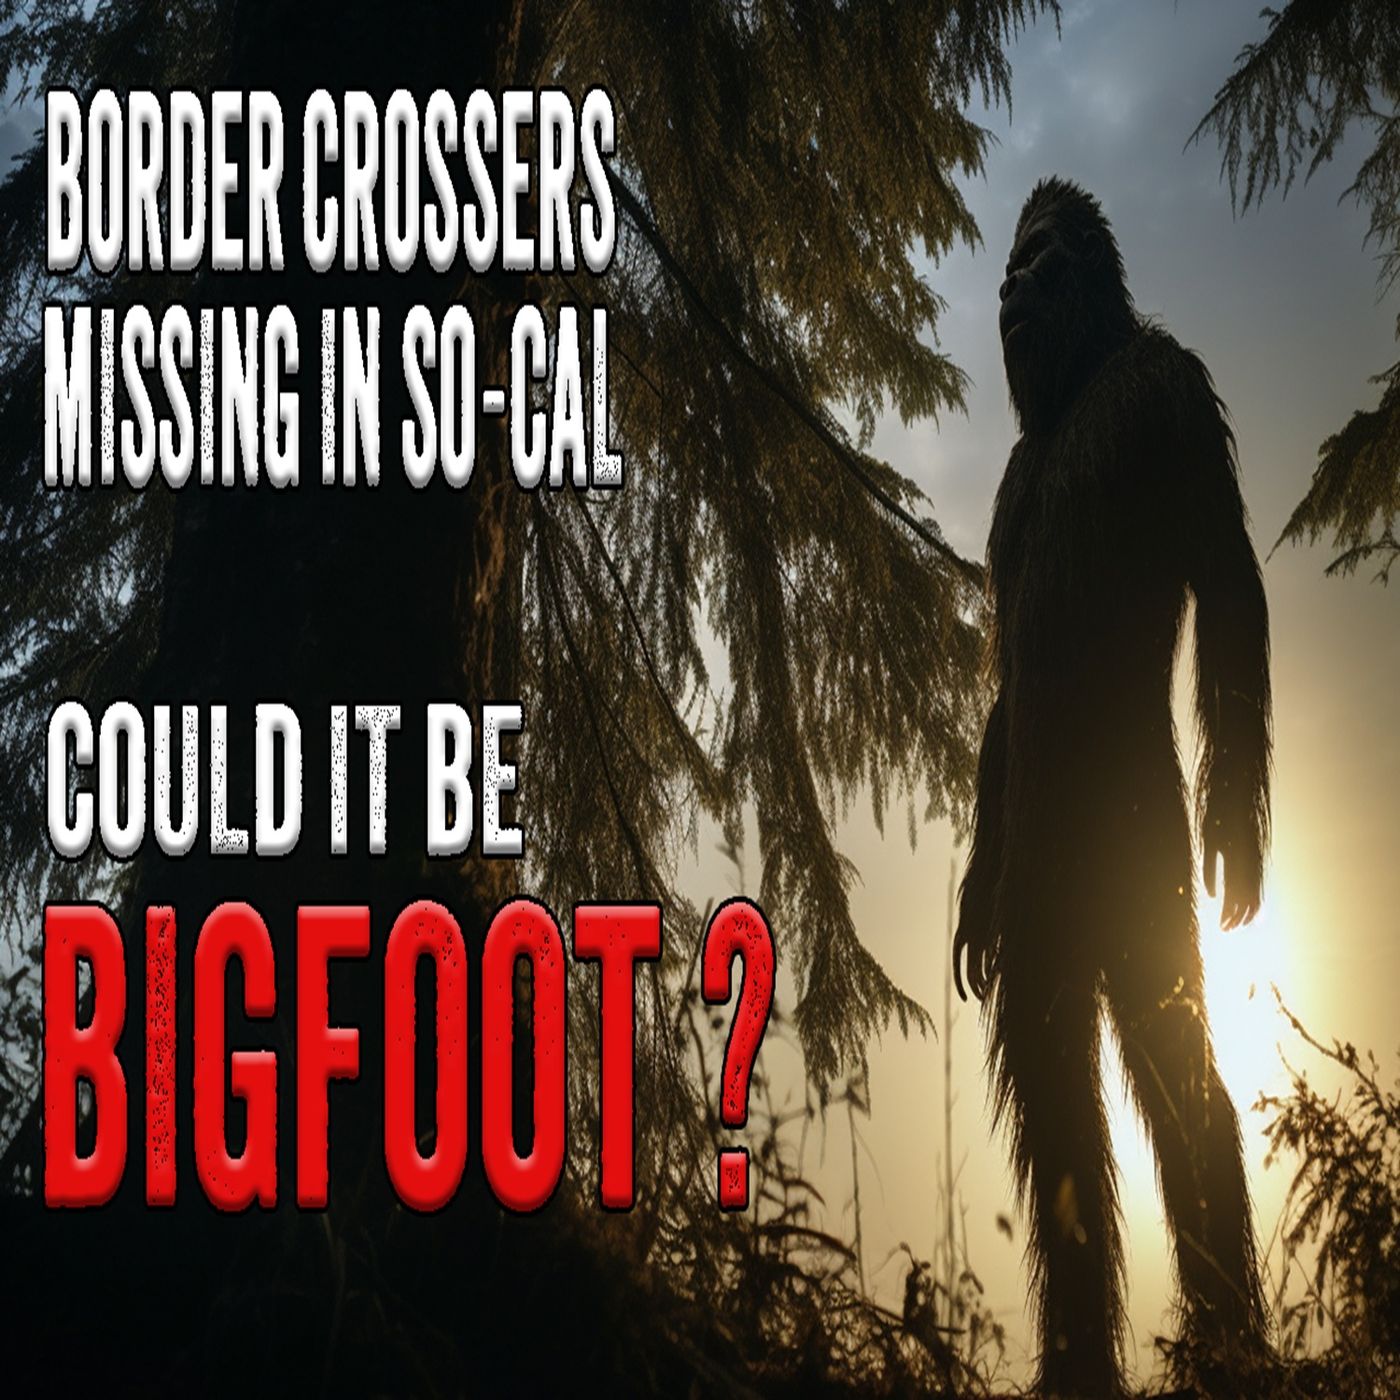 Migrants are Missing on the So-Cal Border. Is it Bigfoot?